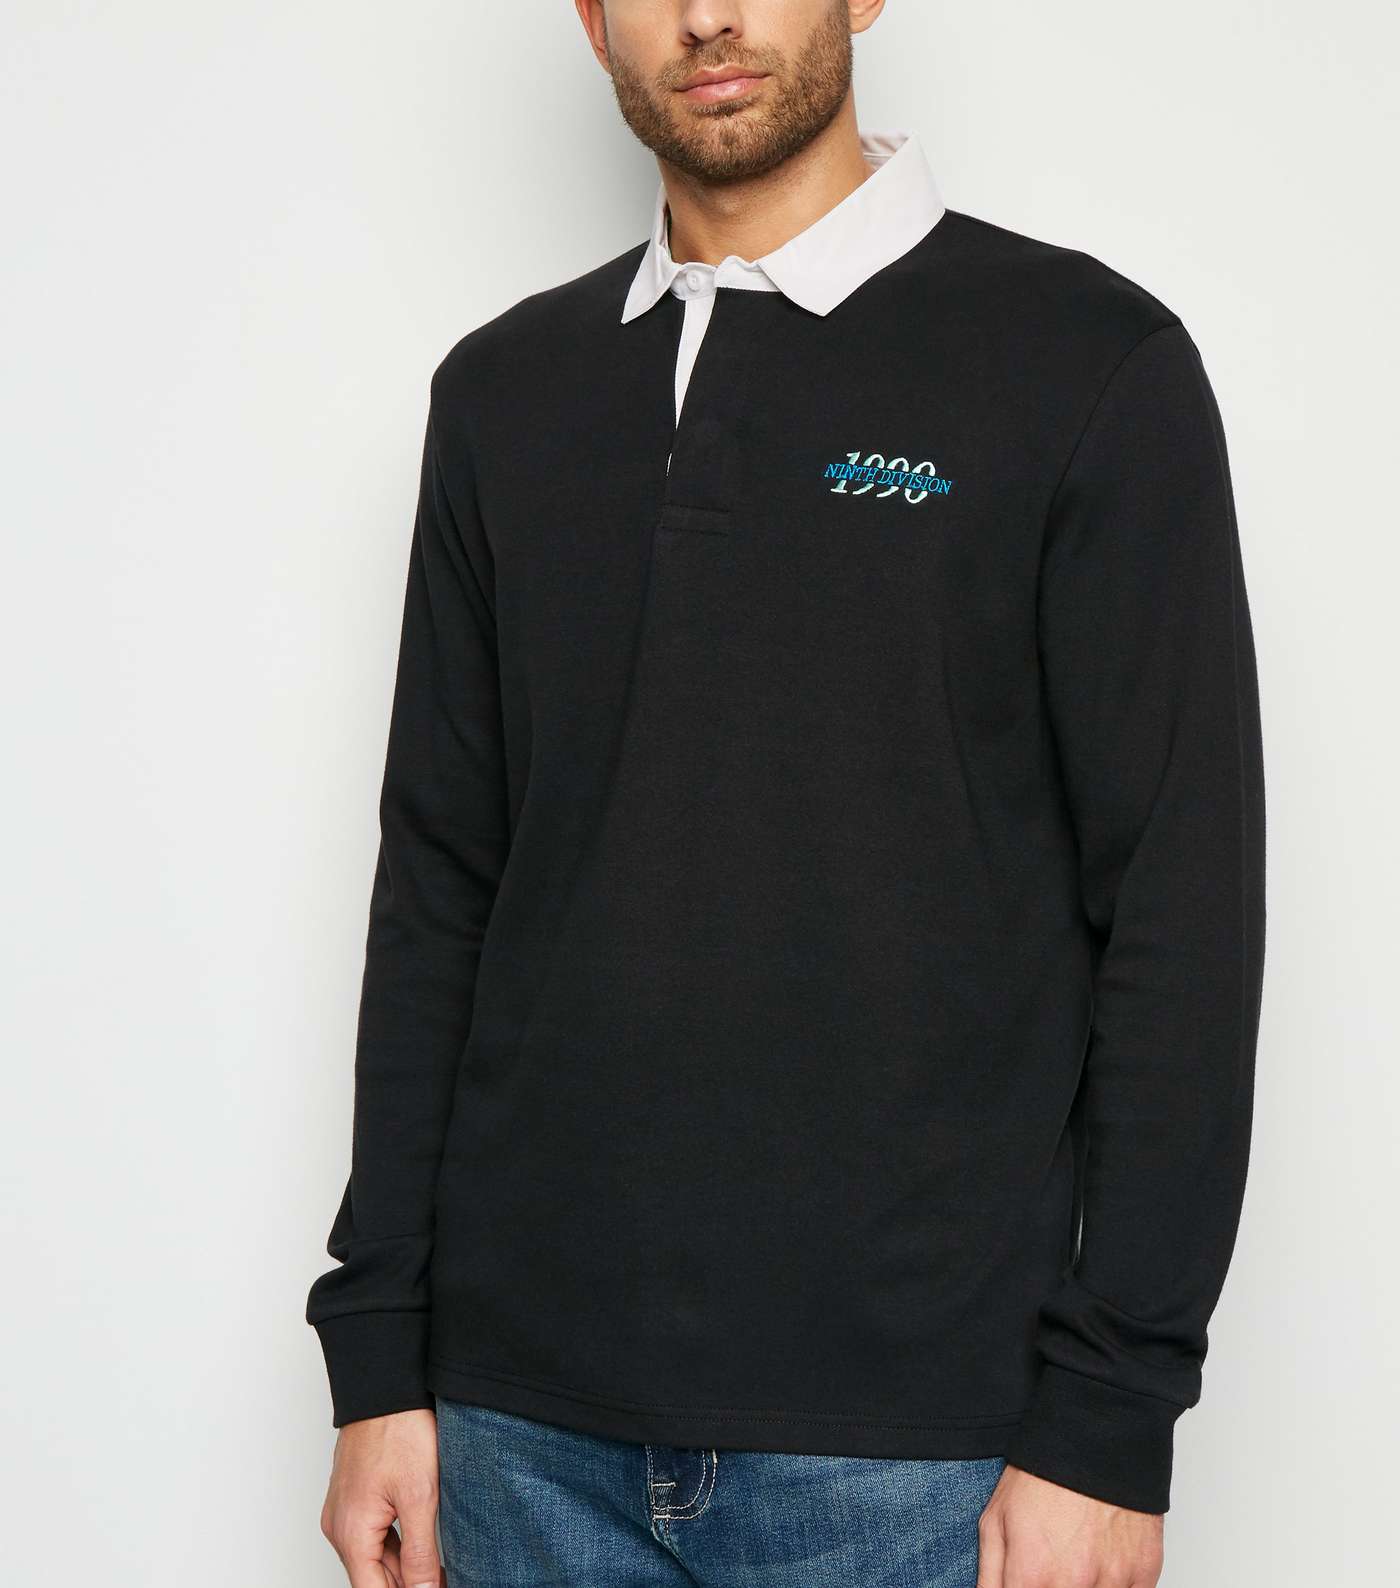 Black 1990 Embroidered Slogan Rugby Shirt